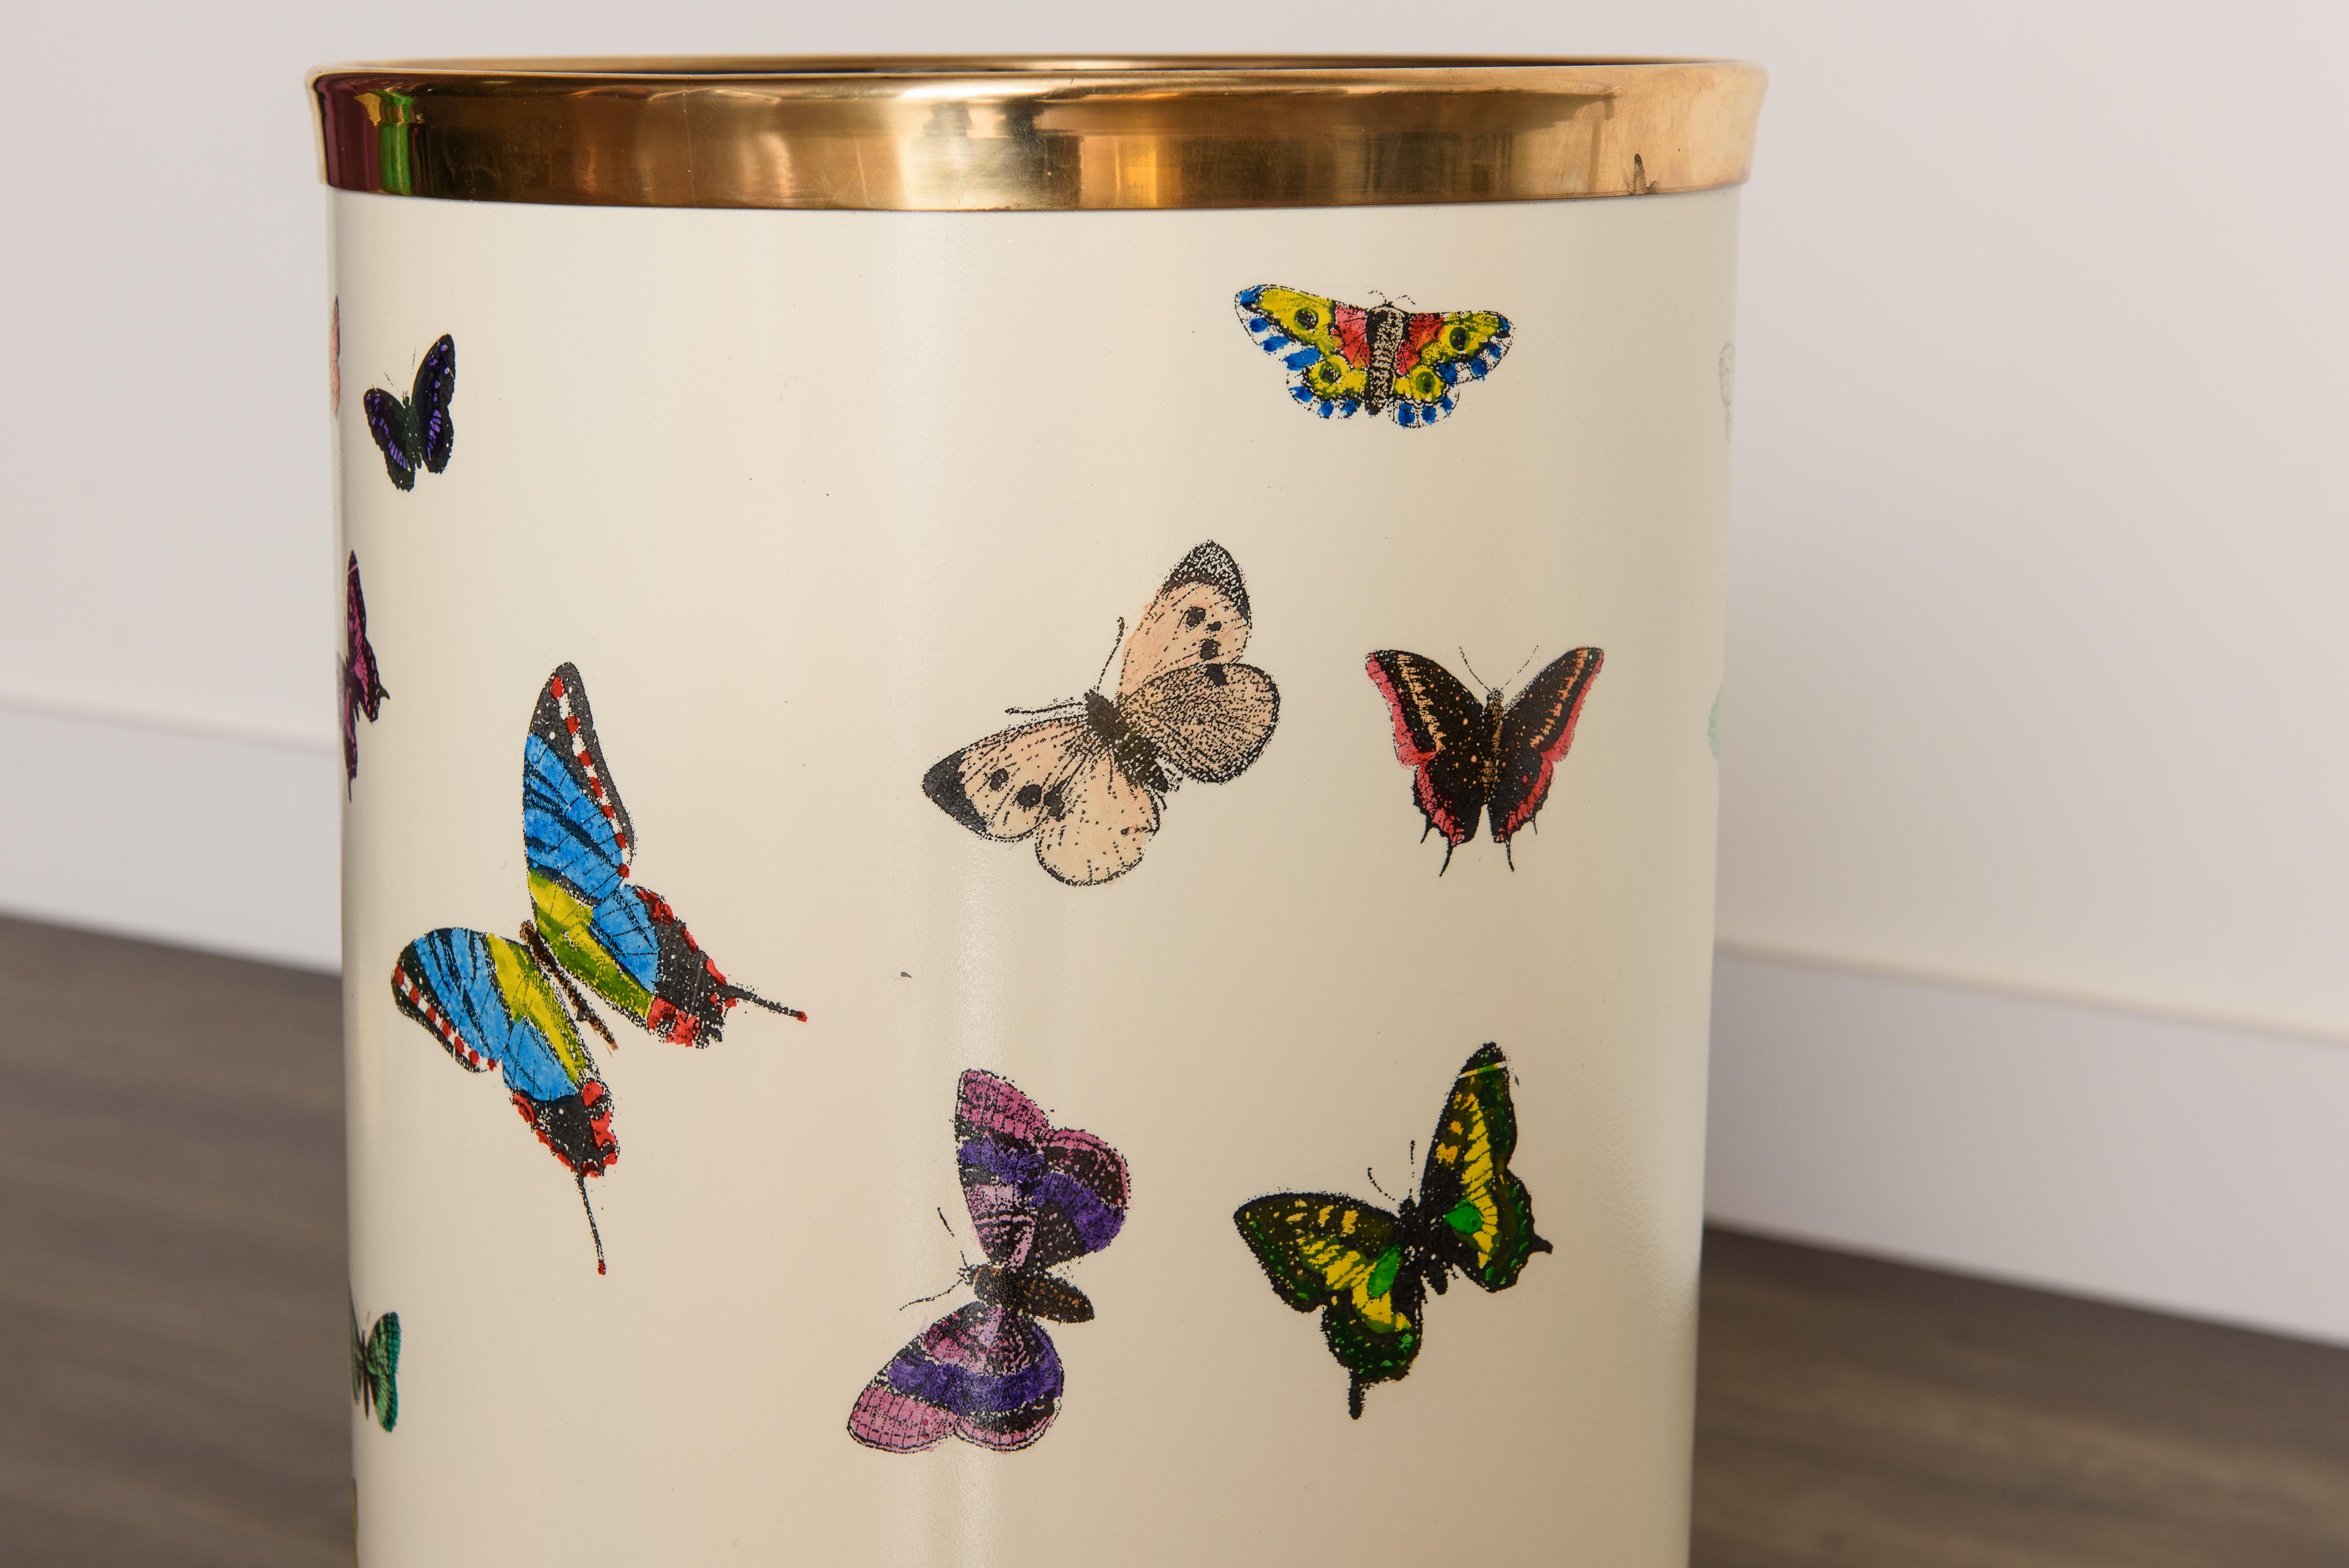 Metal 'Butterflies' Umbrella Stand by Piero Fornasetti, circa 1960s Italy, Signed 